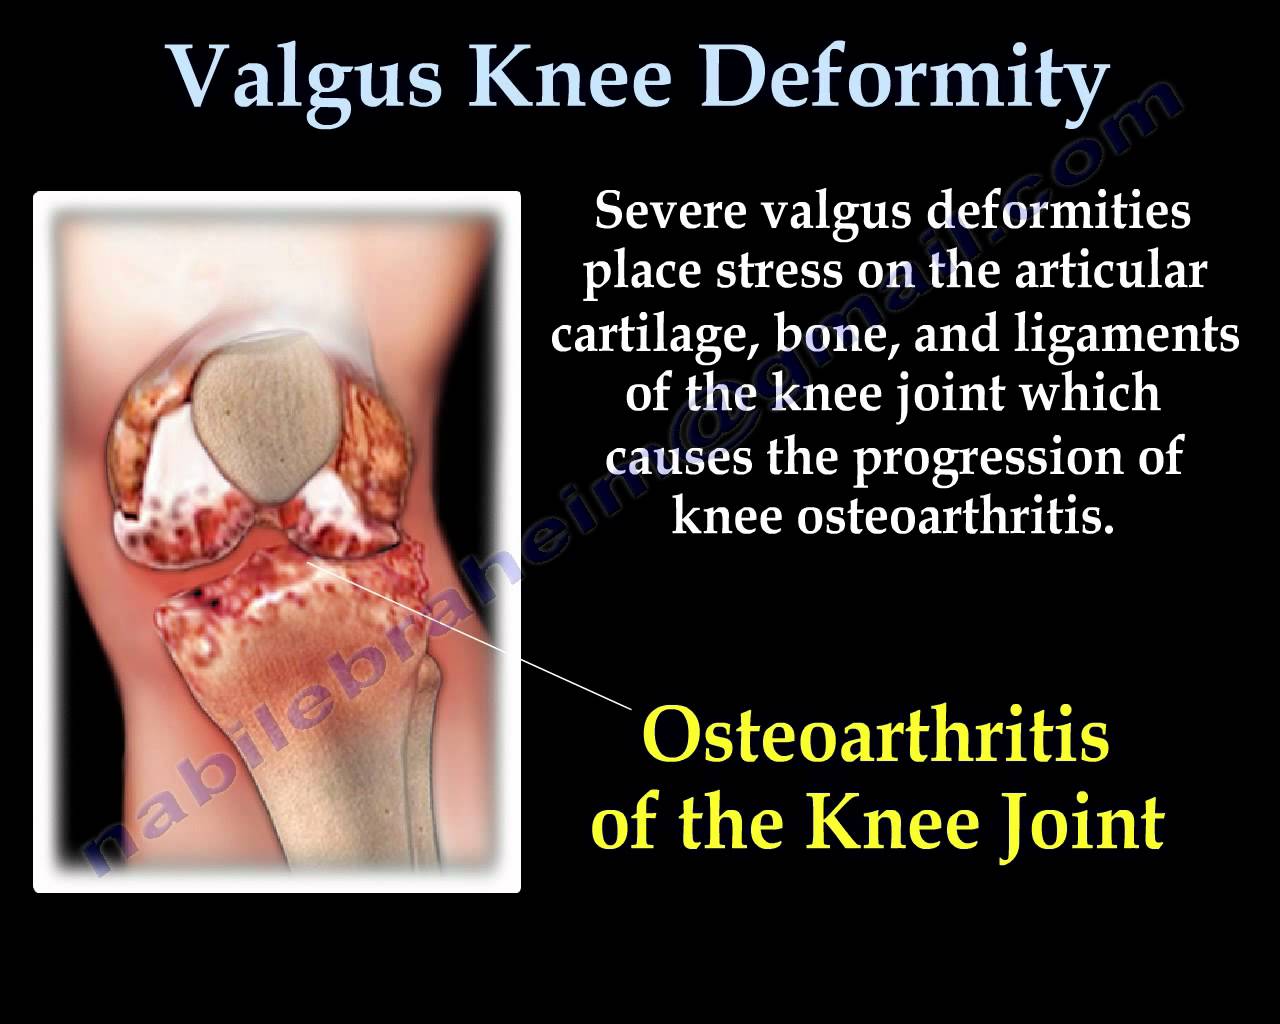 Reasonably Well: The Knee Bone is Connected to the Hip Bone...